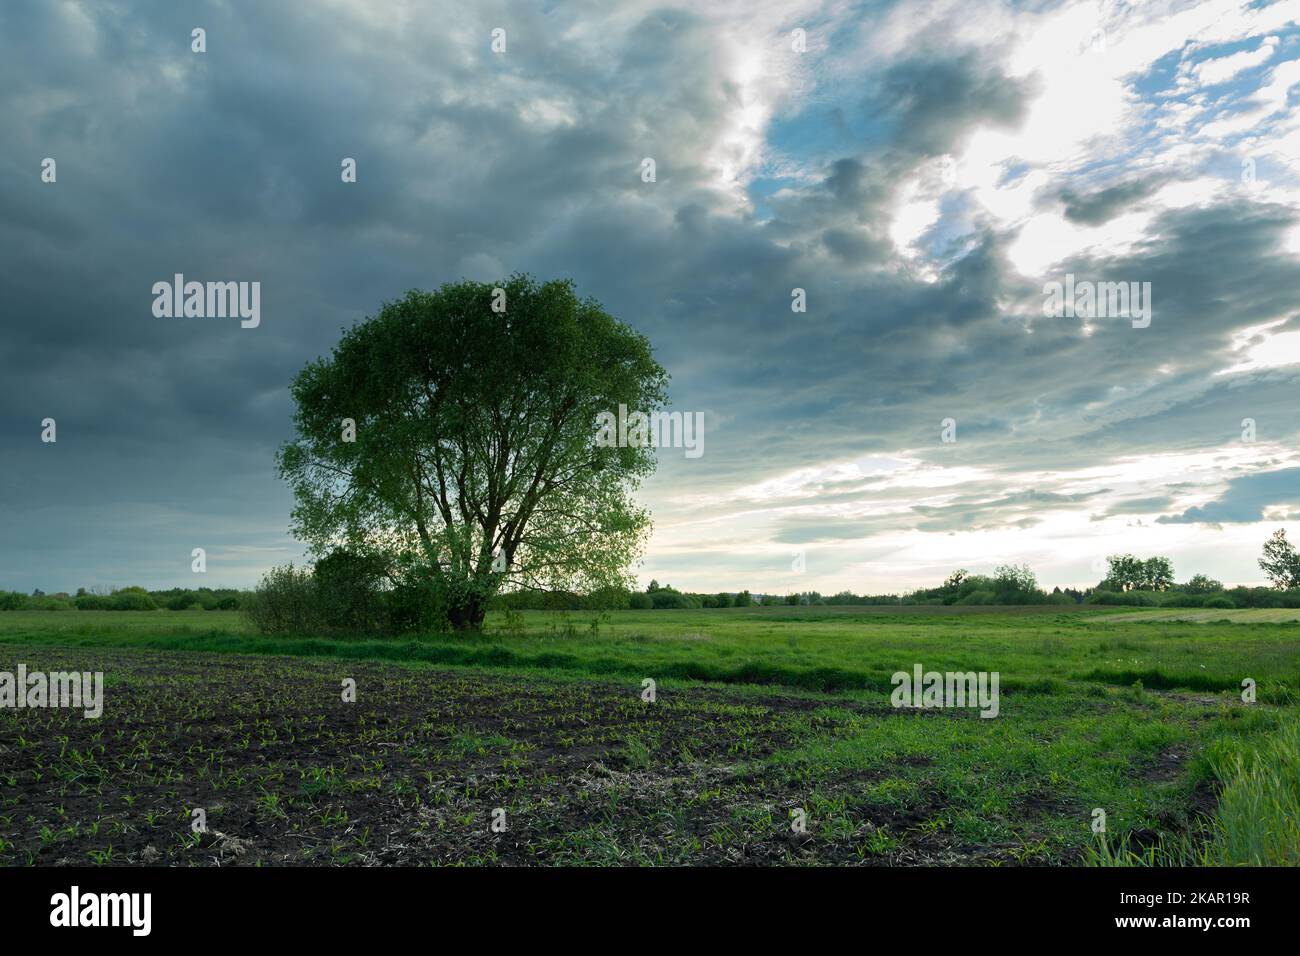 A farmland and a large tree, view on a cloudy May day Stock Photo